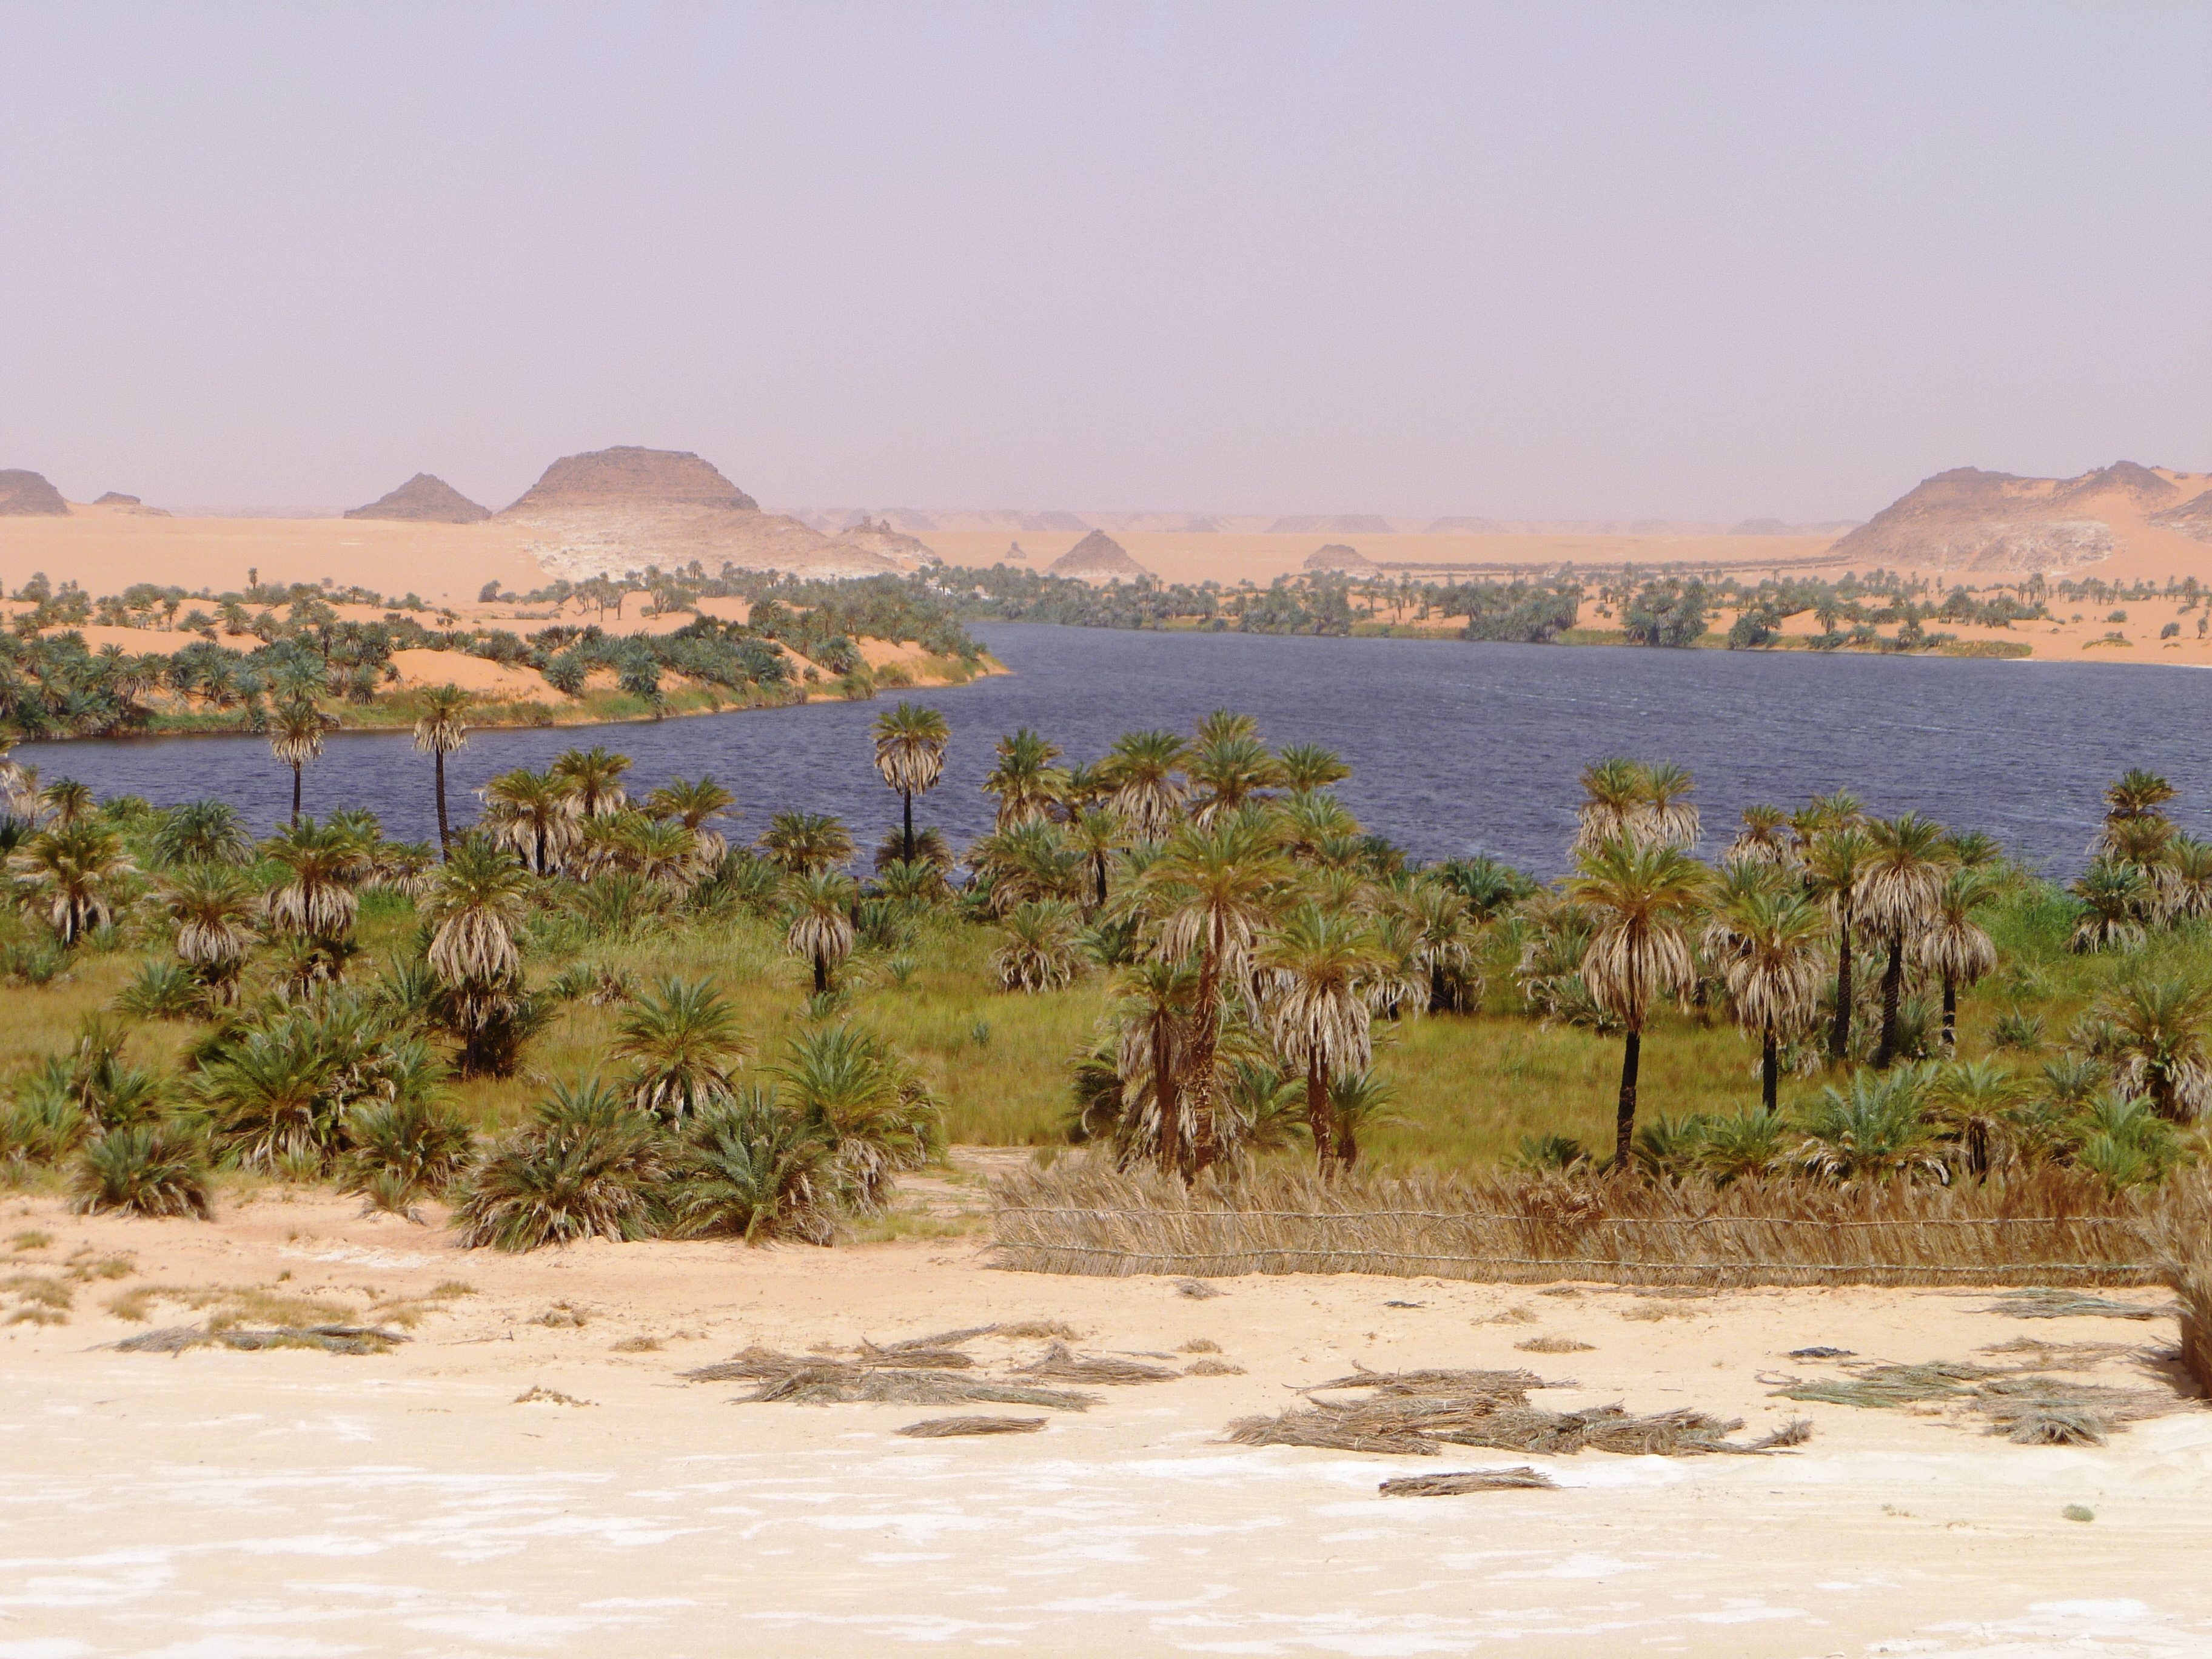 Lakes of Ounianga in Chad.